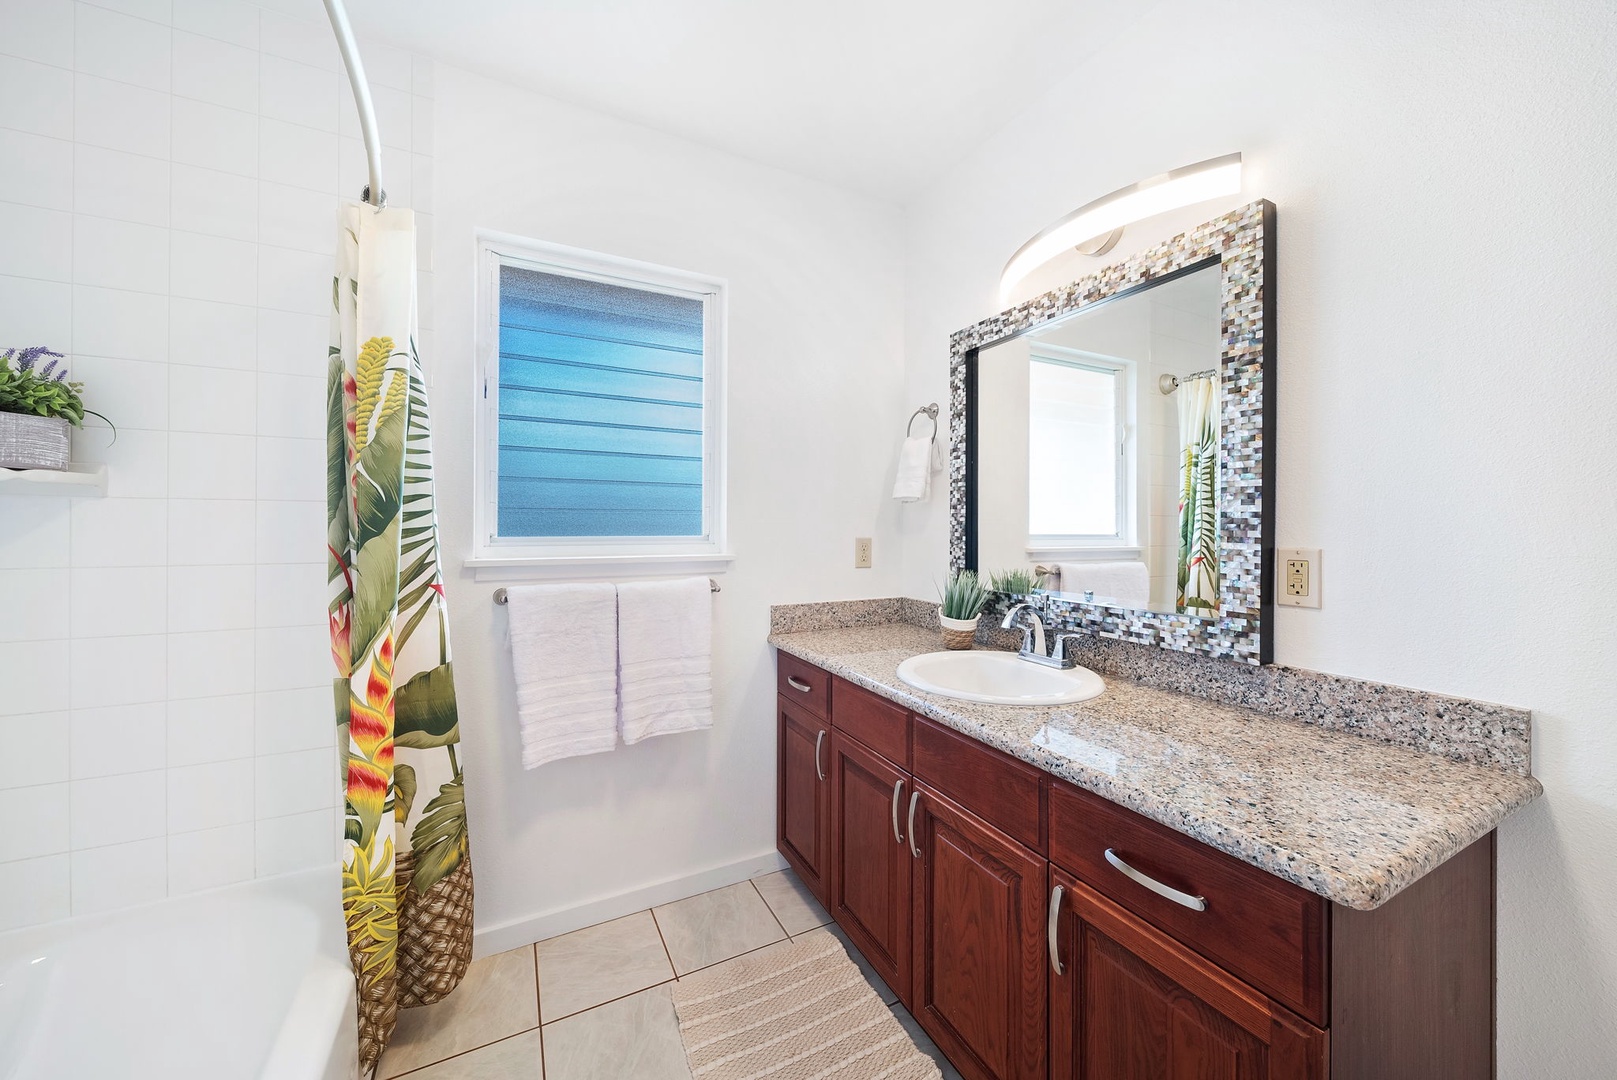 Haleiwa Vacation Rentals, Pikai Hale - This bathroom has a shower/tub combo and accessible from all spaces of the home